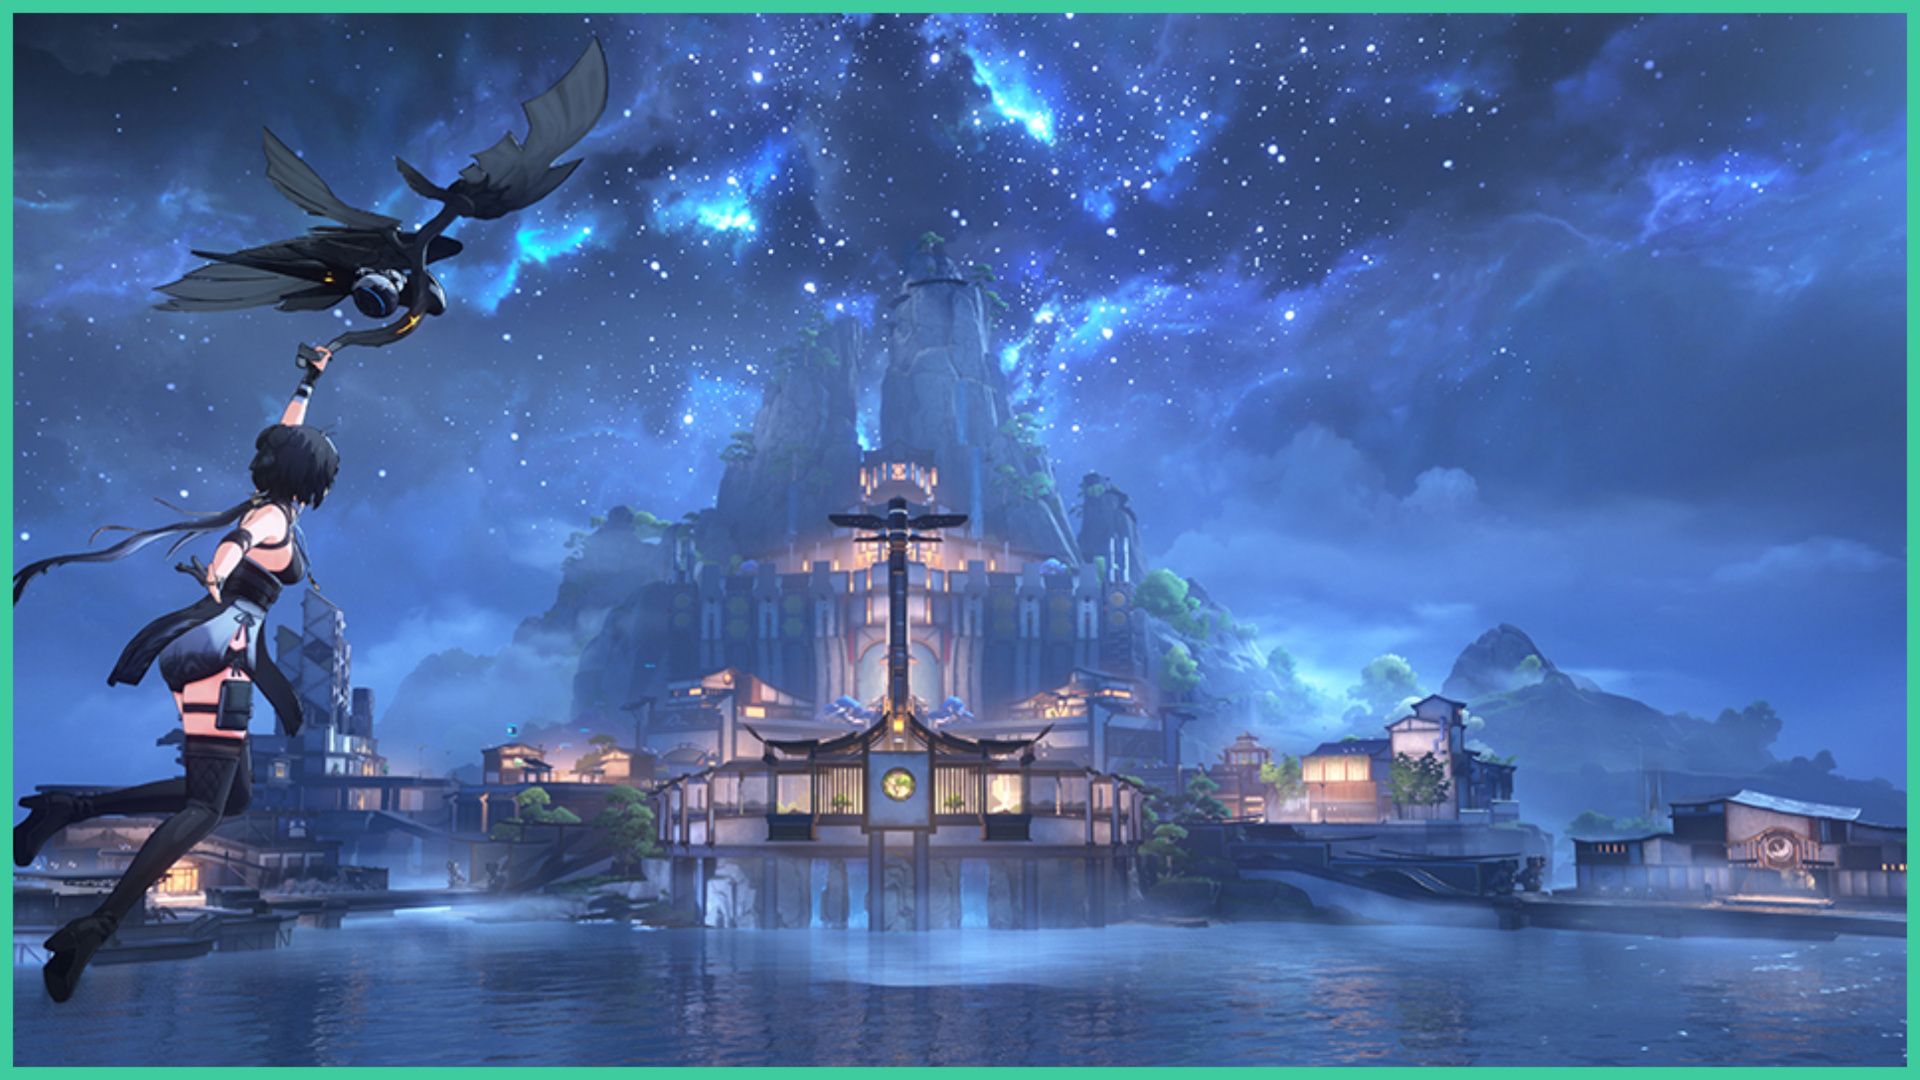 feature image for our wuthering waves tier list, the image features promo art for the game of a character holding on to a robot bird as she flies across the ocean, there is a tall mountain in the distance that reaches up to the stars in the sky, there is a small city around the water, with boats docked and glowing lights